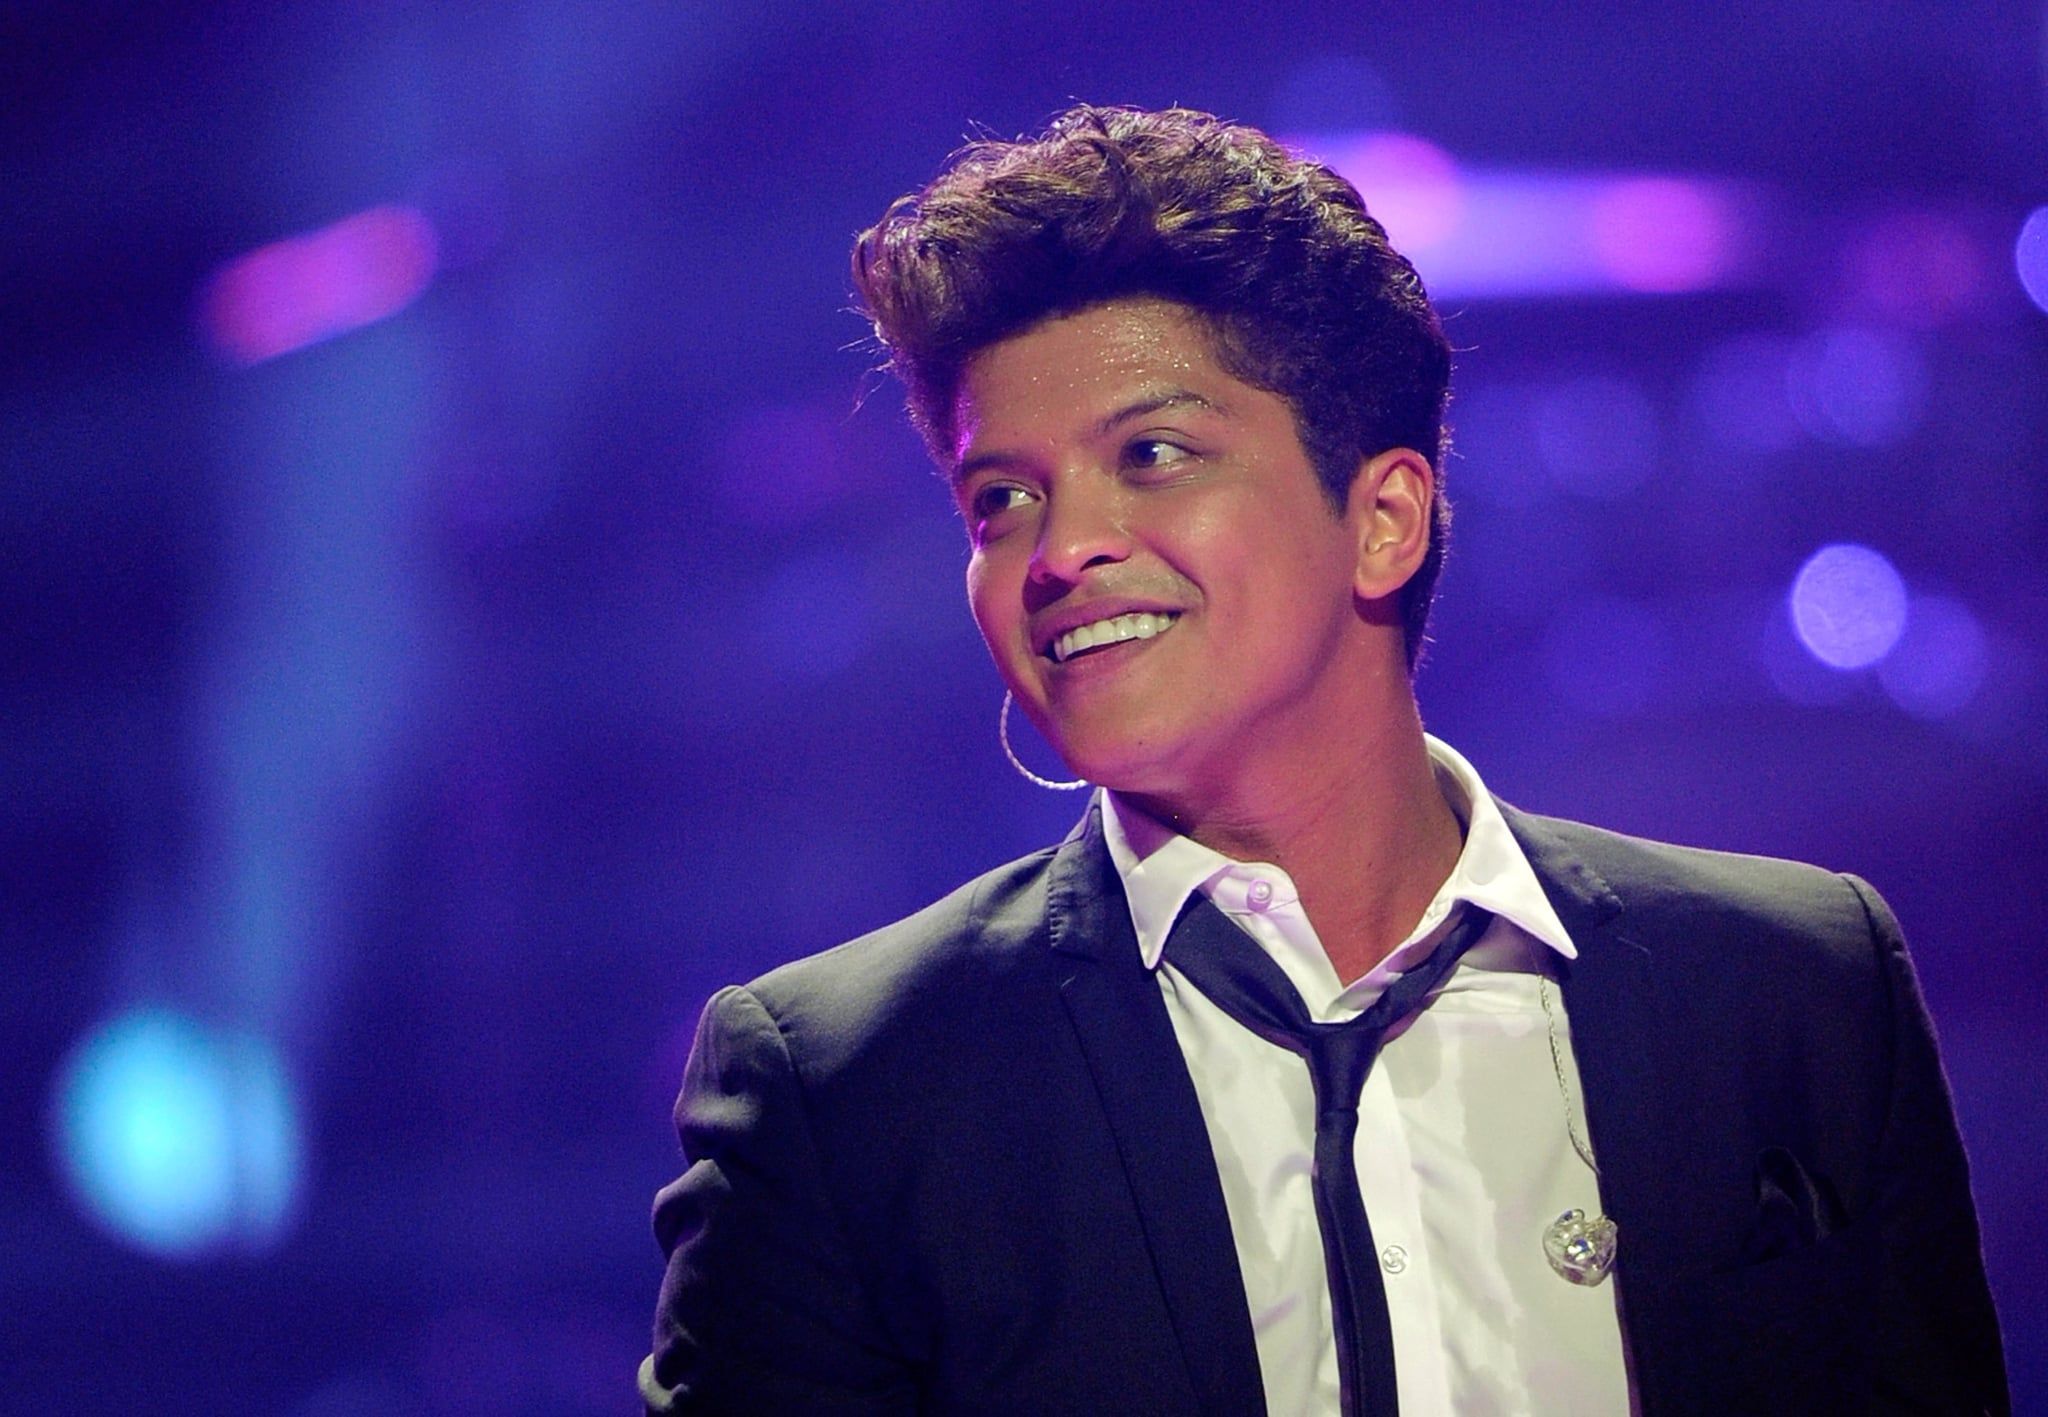 A man in suit and tie smiling - Bruno Mars